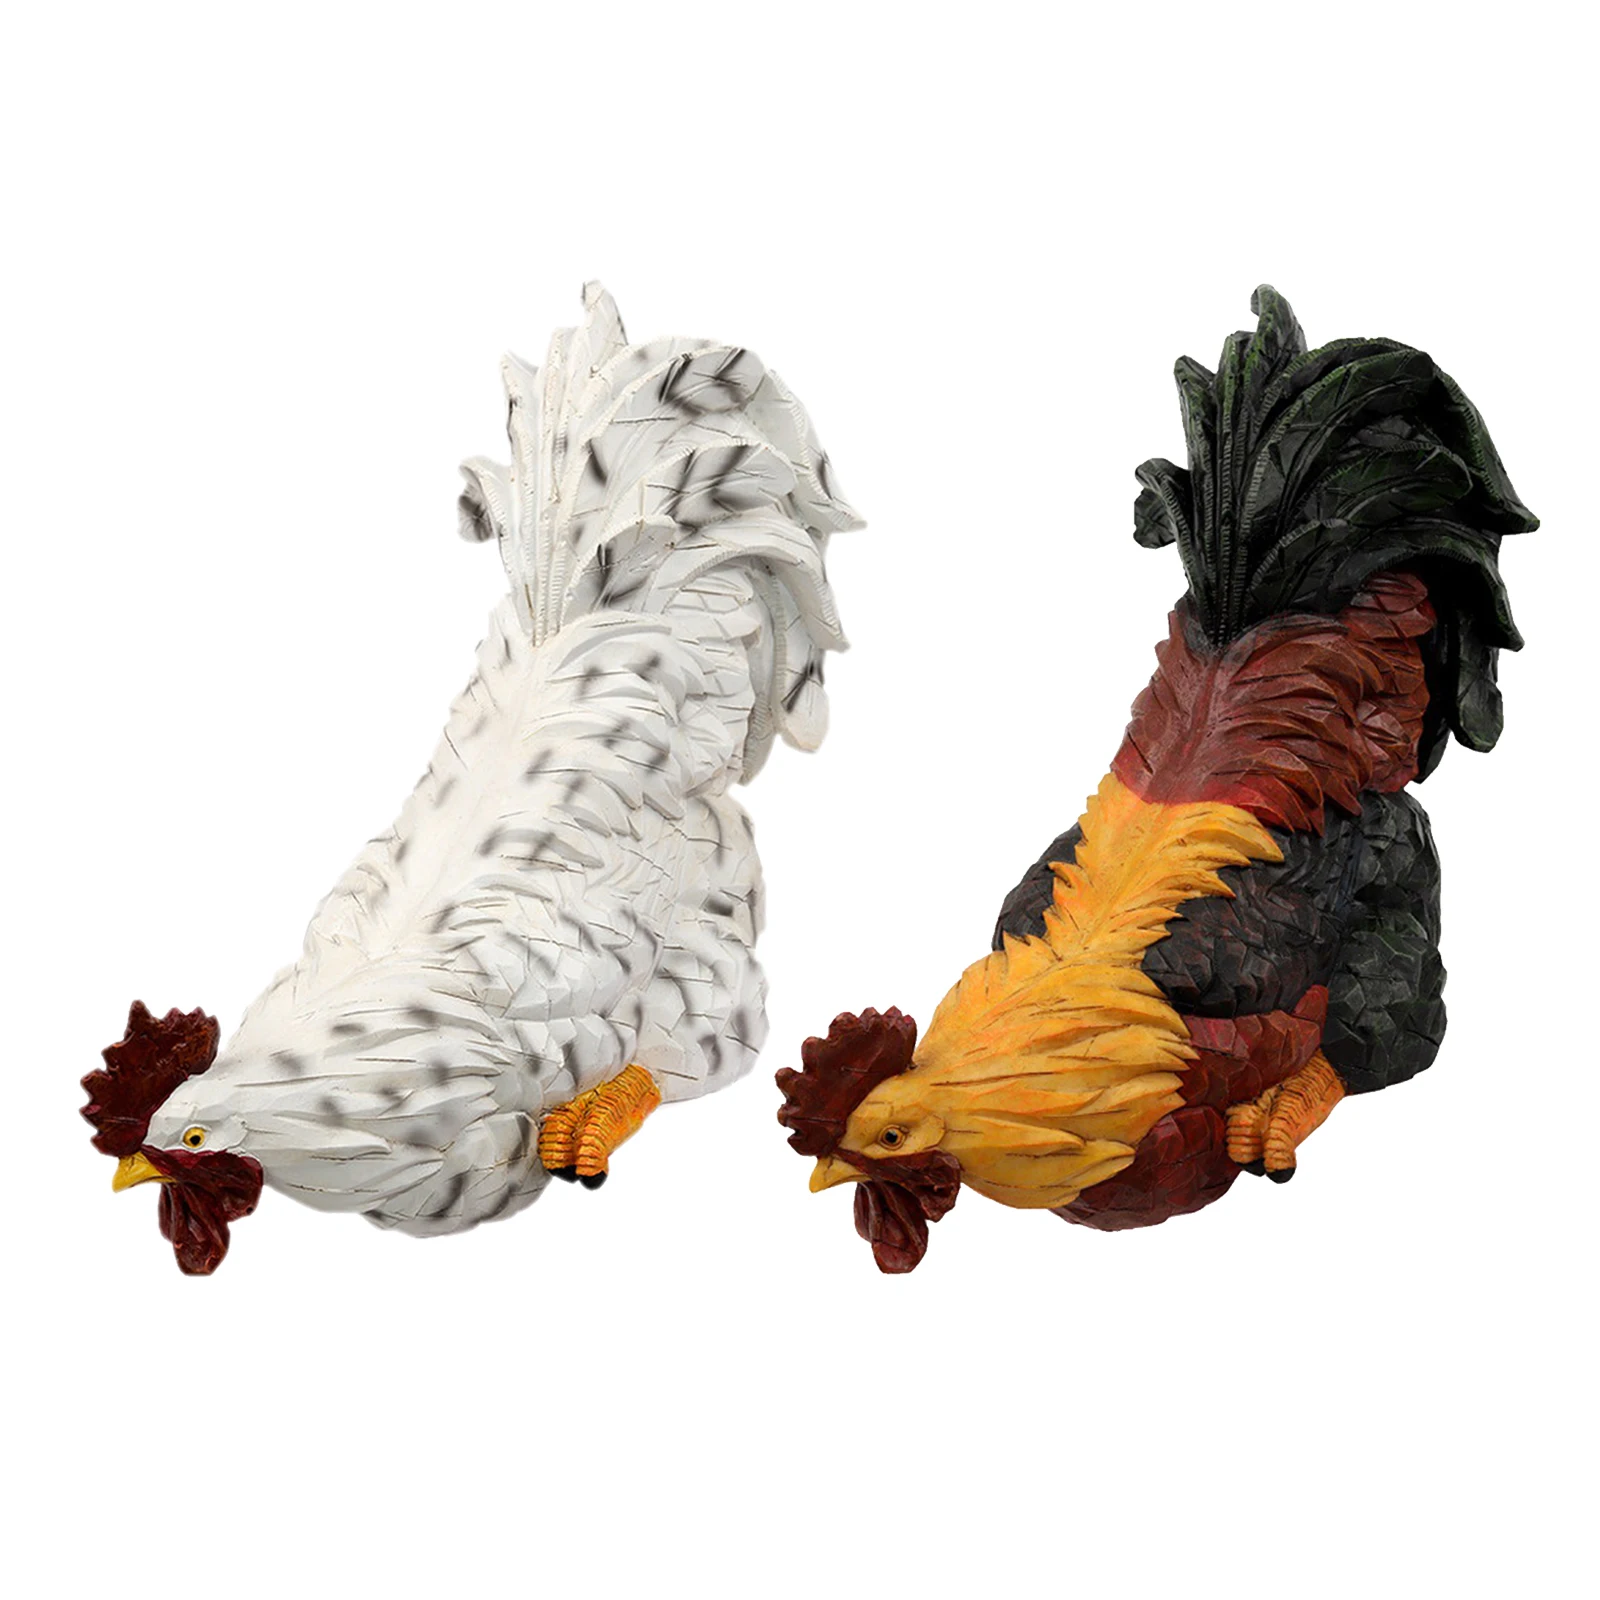 

Outdoor Resin Garden Rooster Statue Hand-Painted Animal Sculpture Home Furnishing Desk Decor Patio Lawn